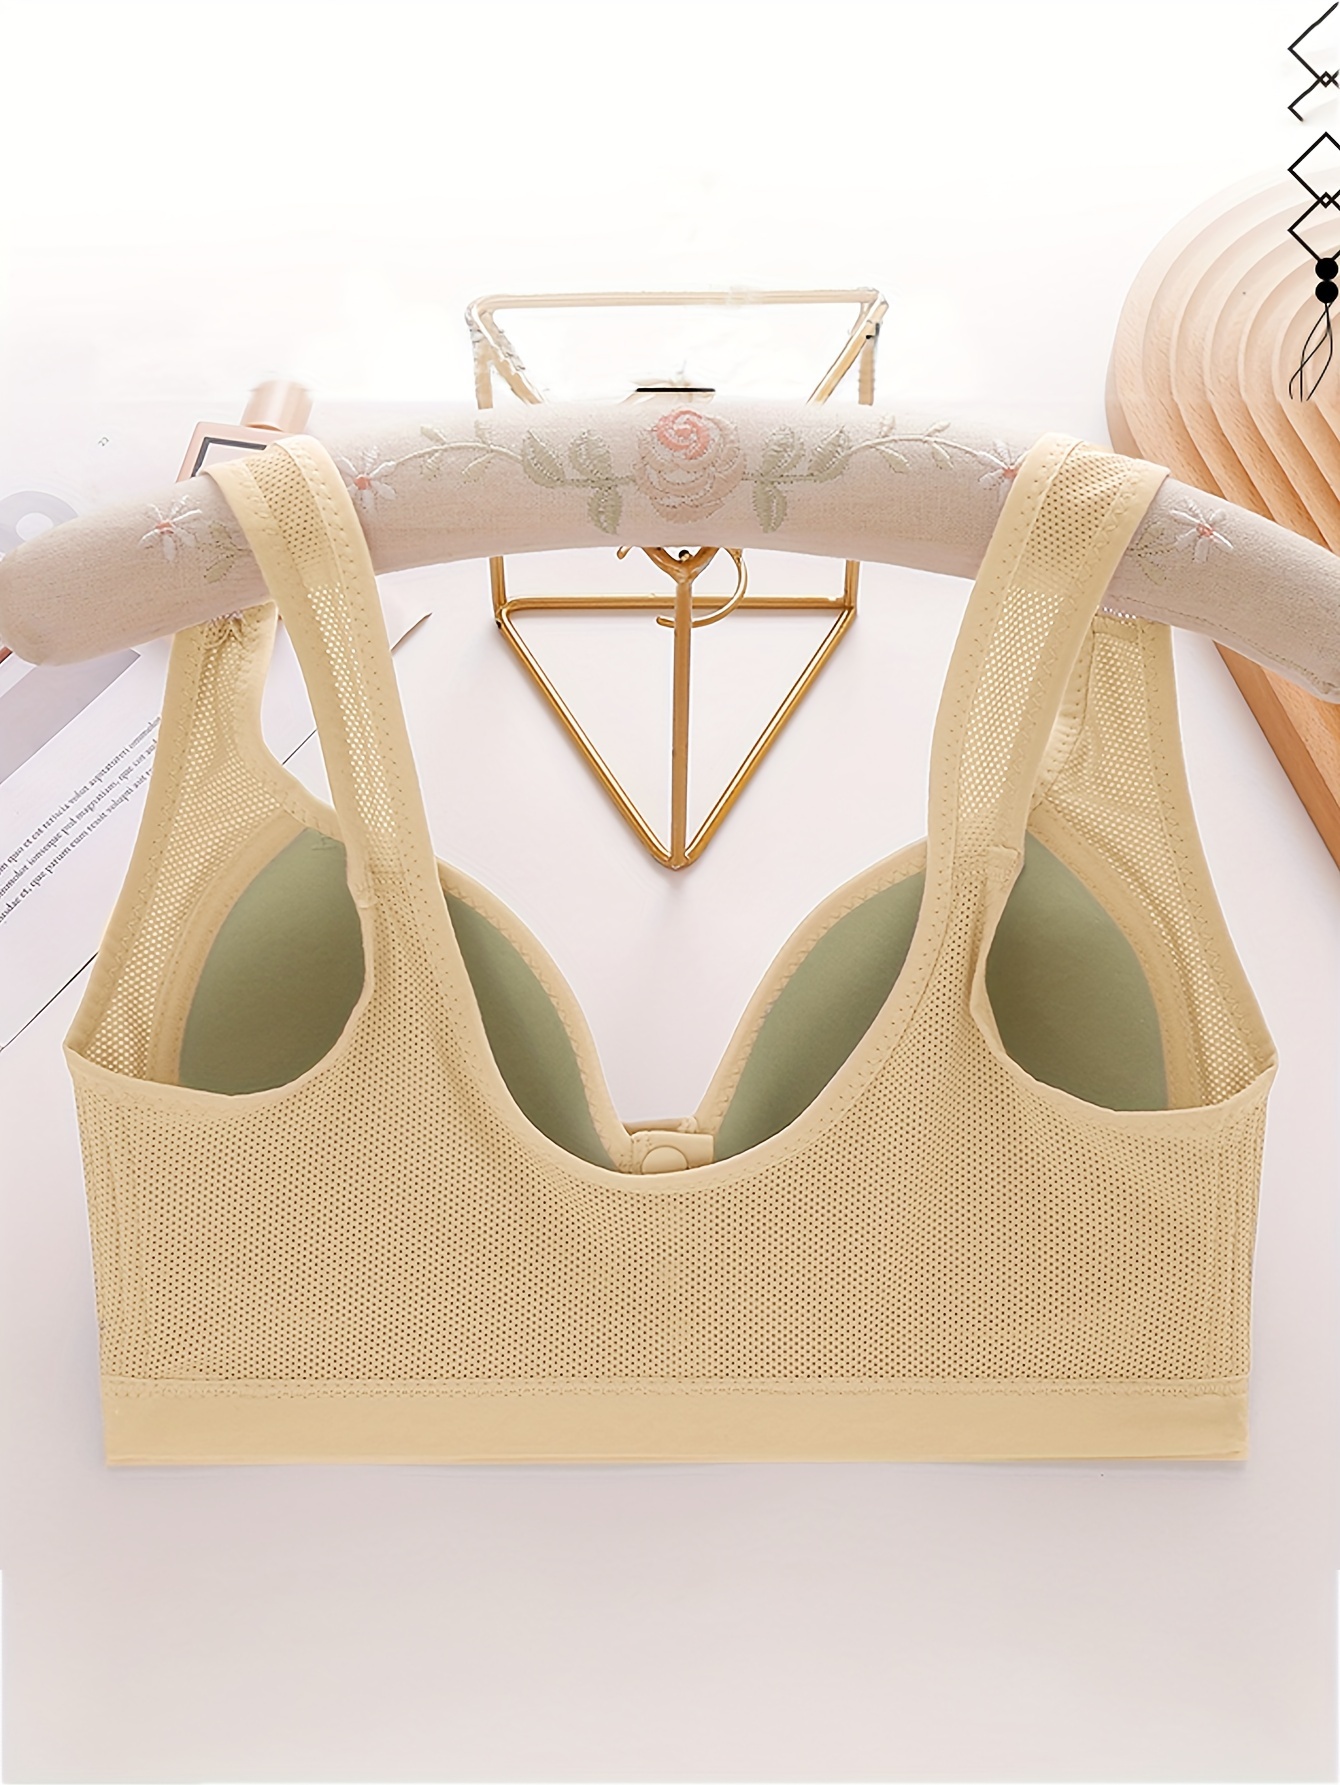 Branelly Bra Front Zip Lace, Branelly The Innovative and Healthy  Underwireless Bra,V Neck Front Closure Breathable Push up Bras for Women  Plus